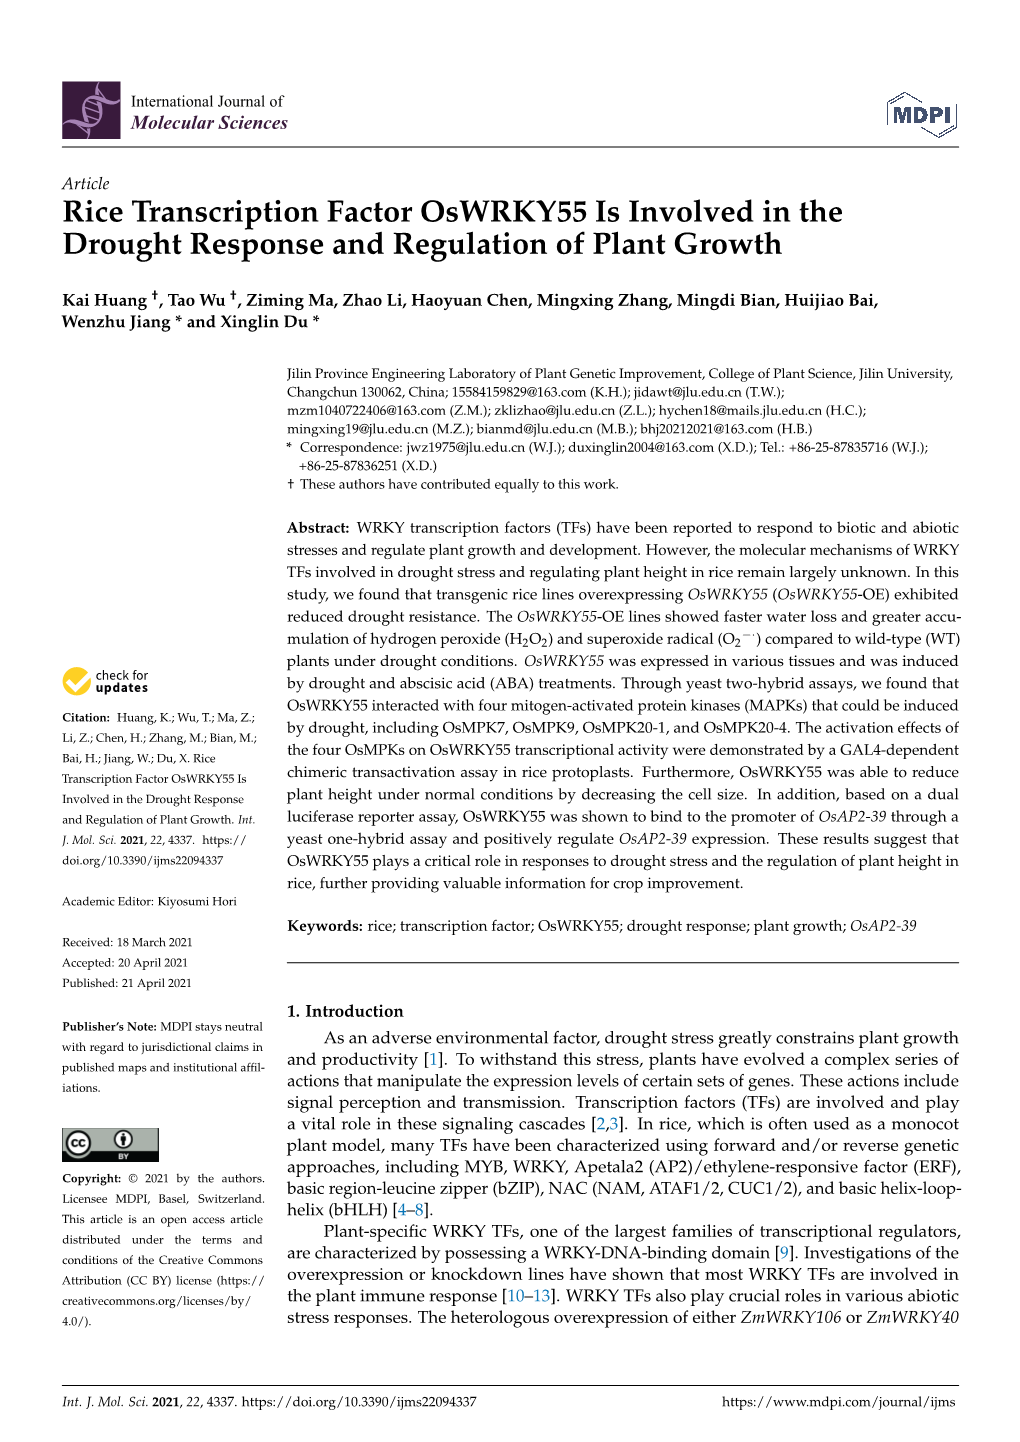 Rice Transcription Factor Oswrky55 Is Involved in the Drought Response and Regulation of Plant Growth